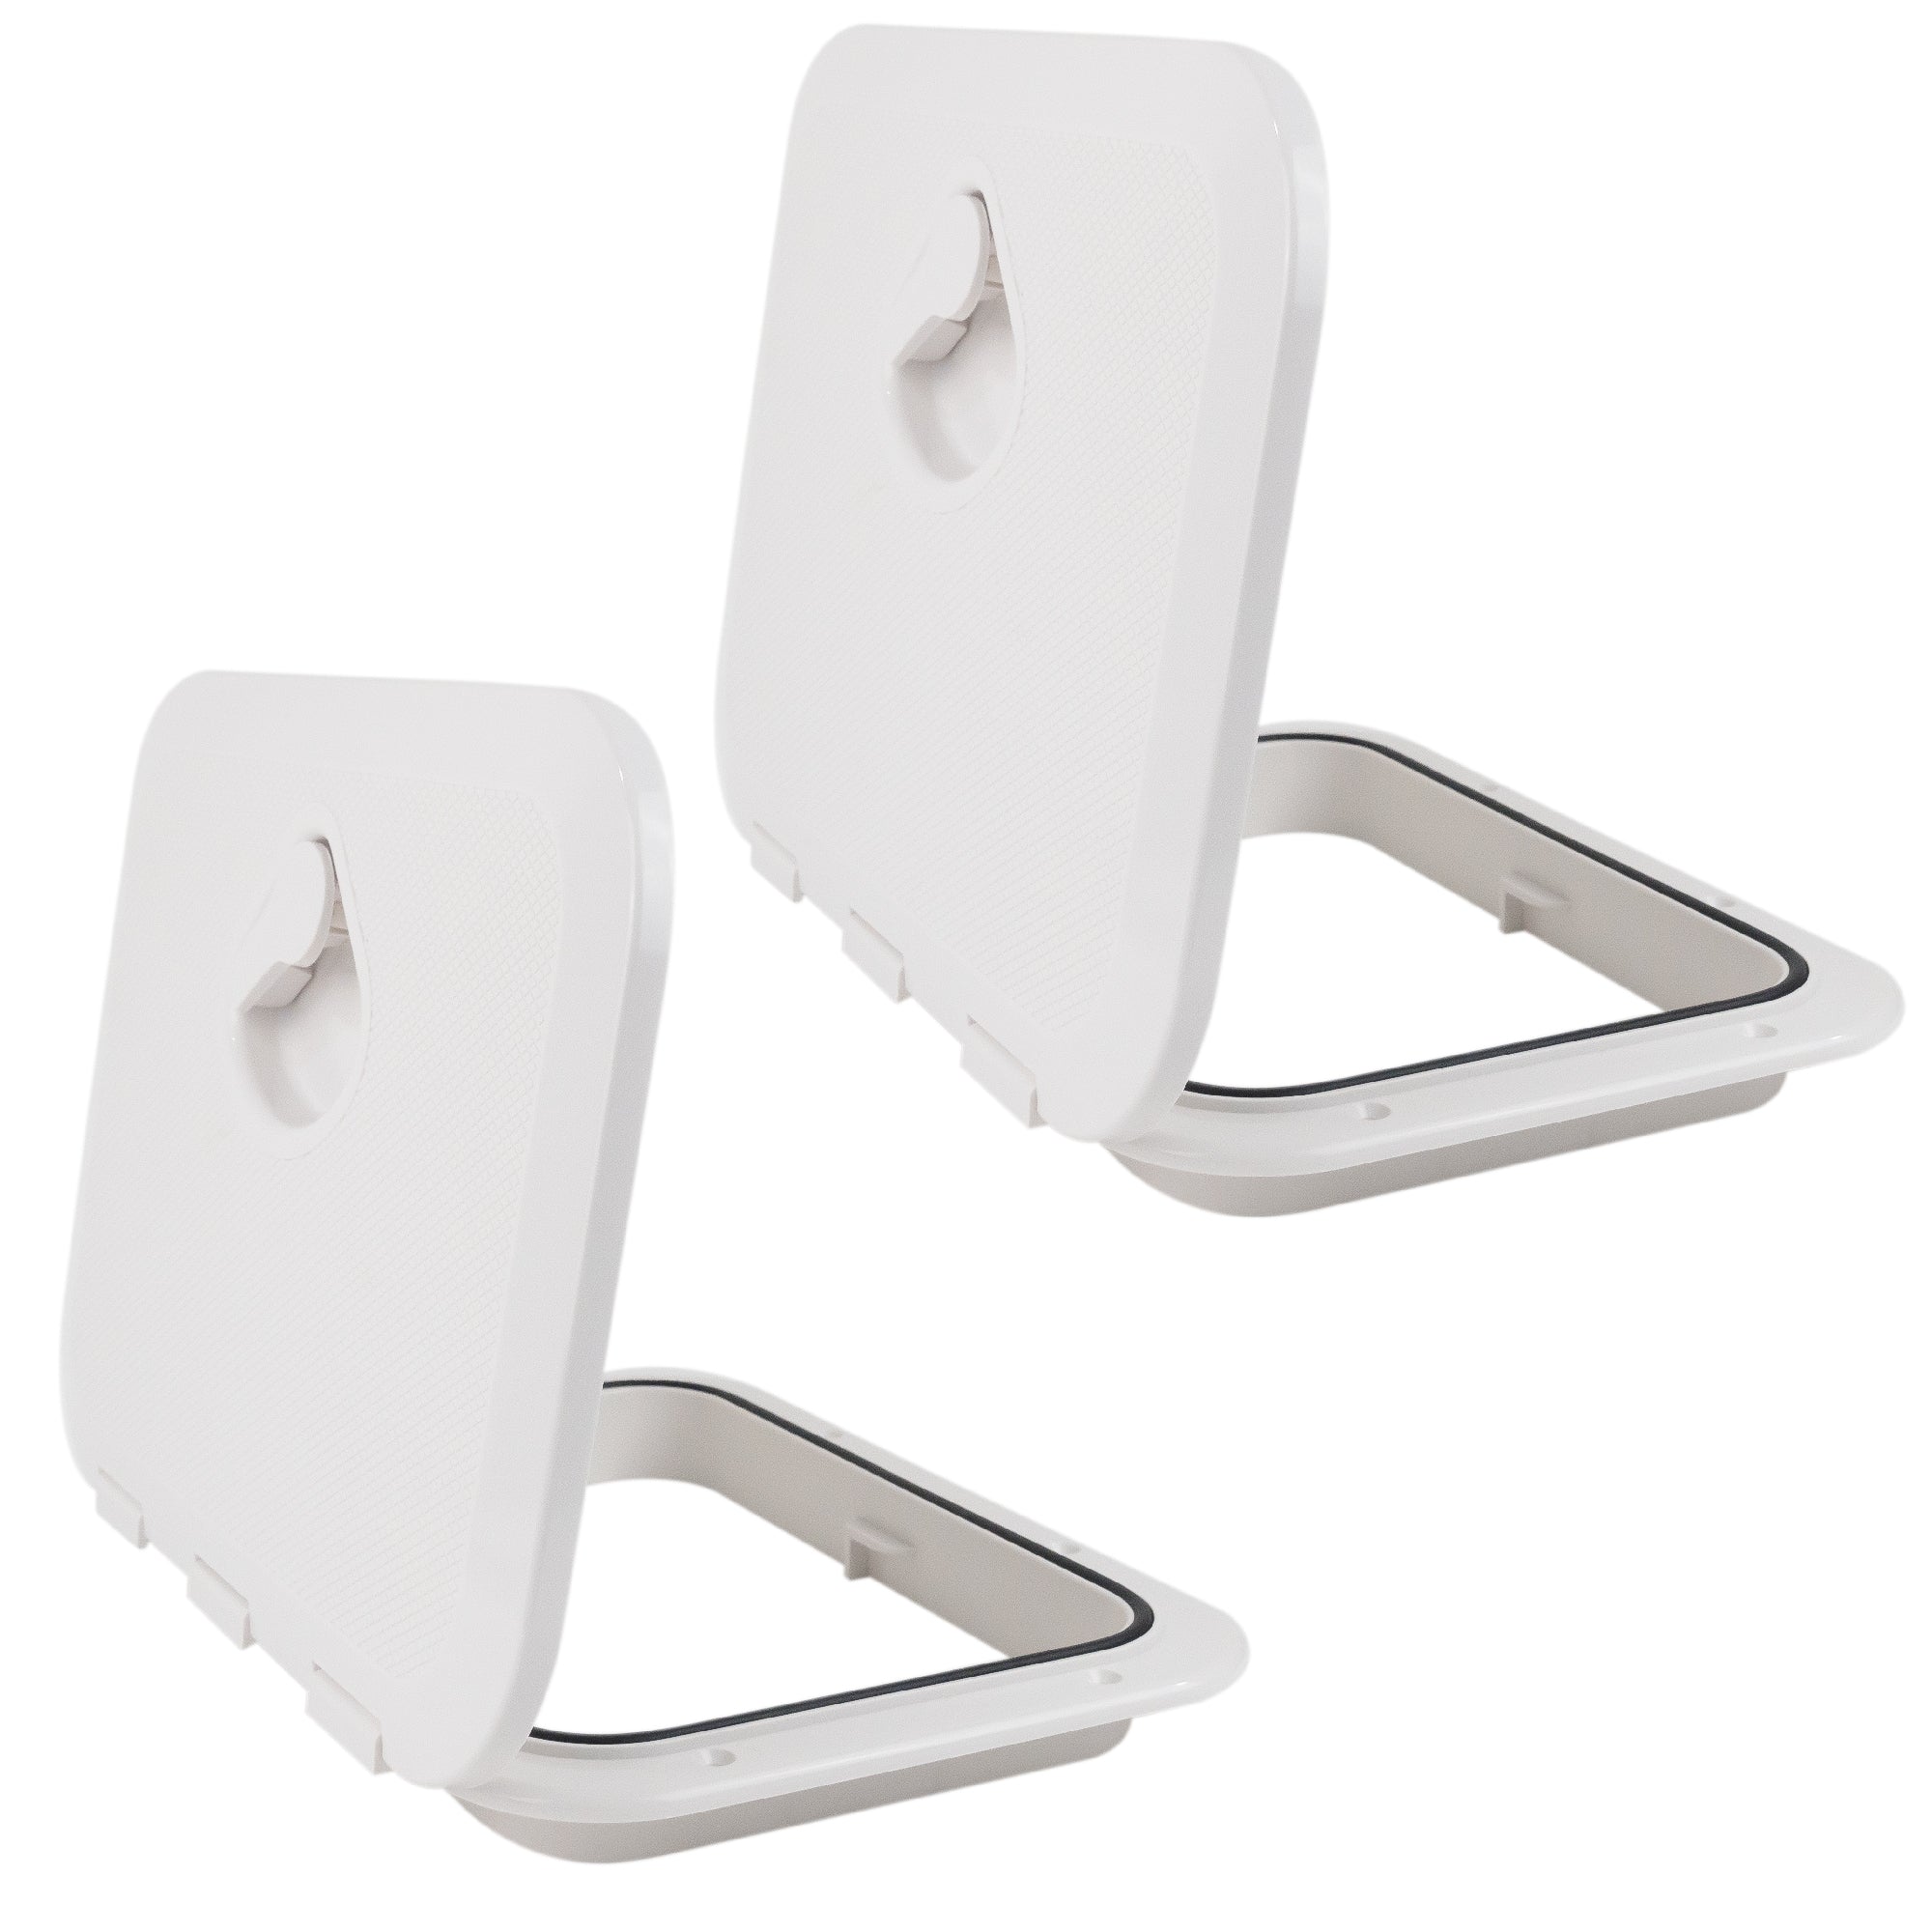 Boat Access Hatch 10-5/8" x 14-3/4" Recessed Handle Locking System, White, 2-Pack - FO3624-M2